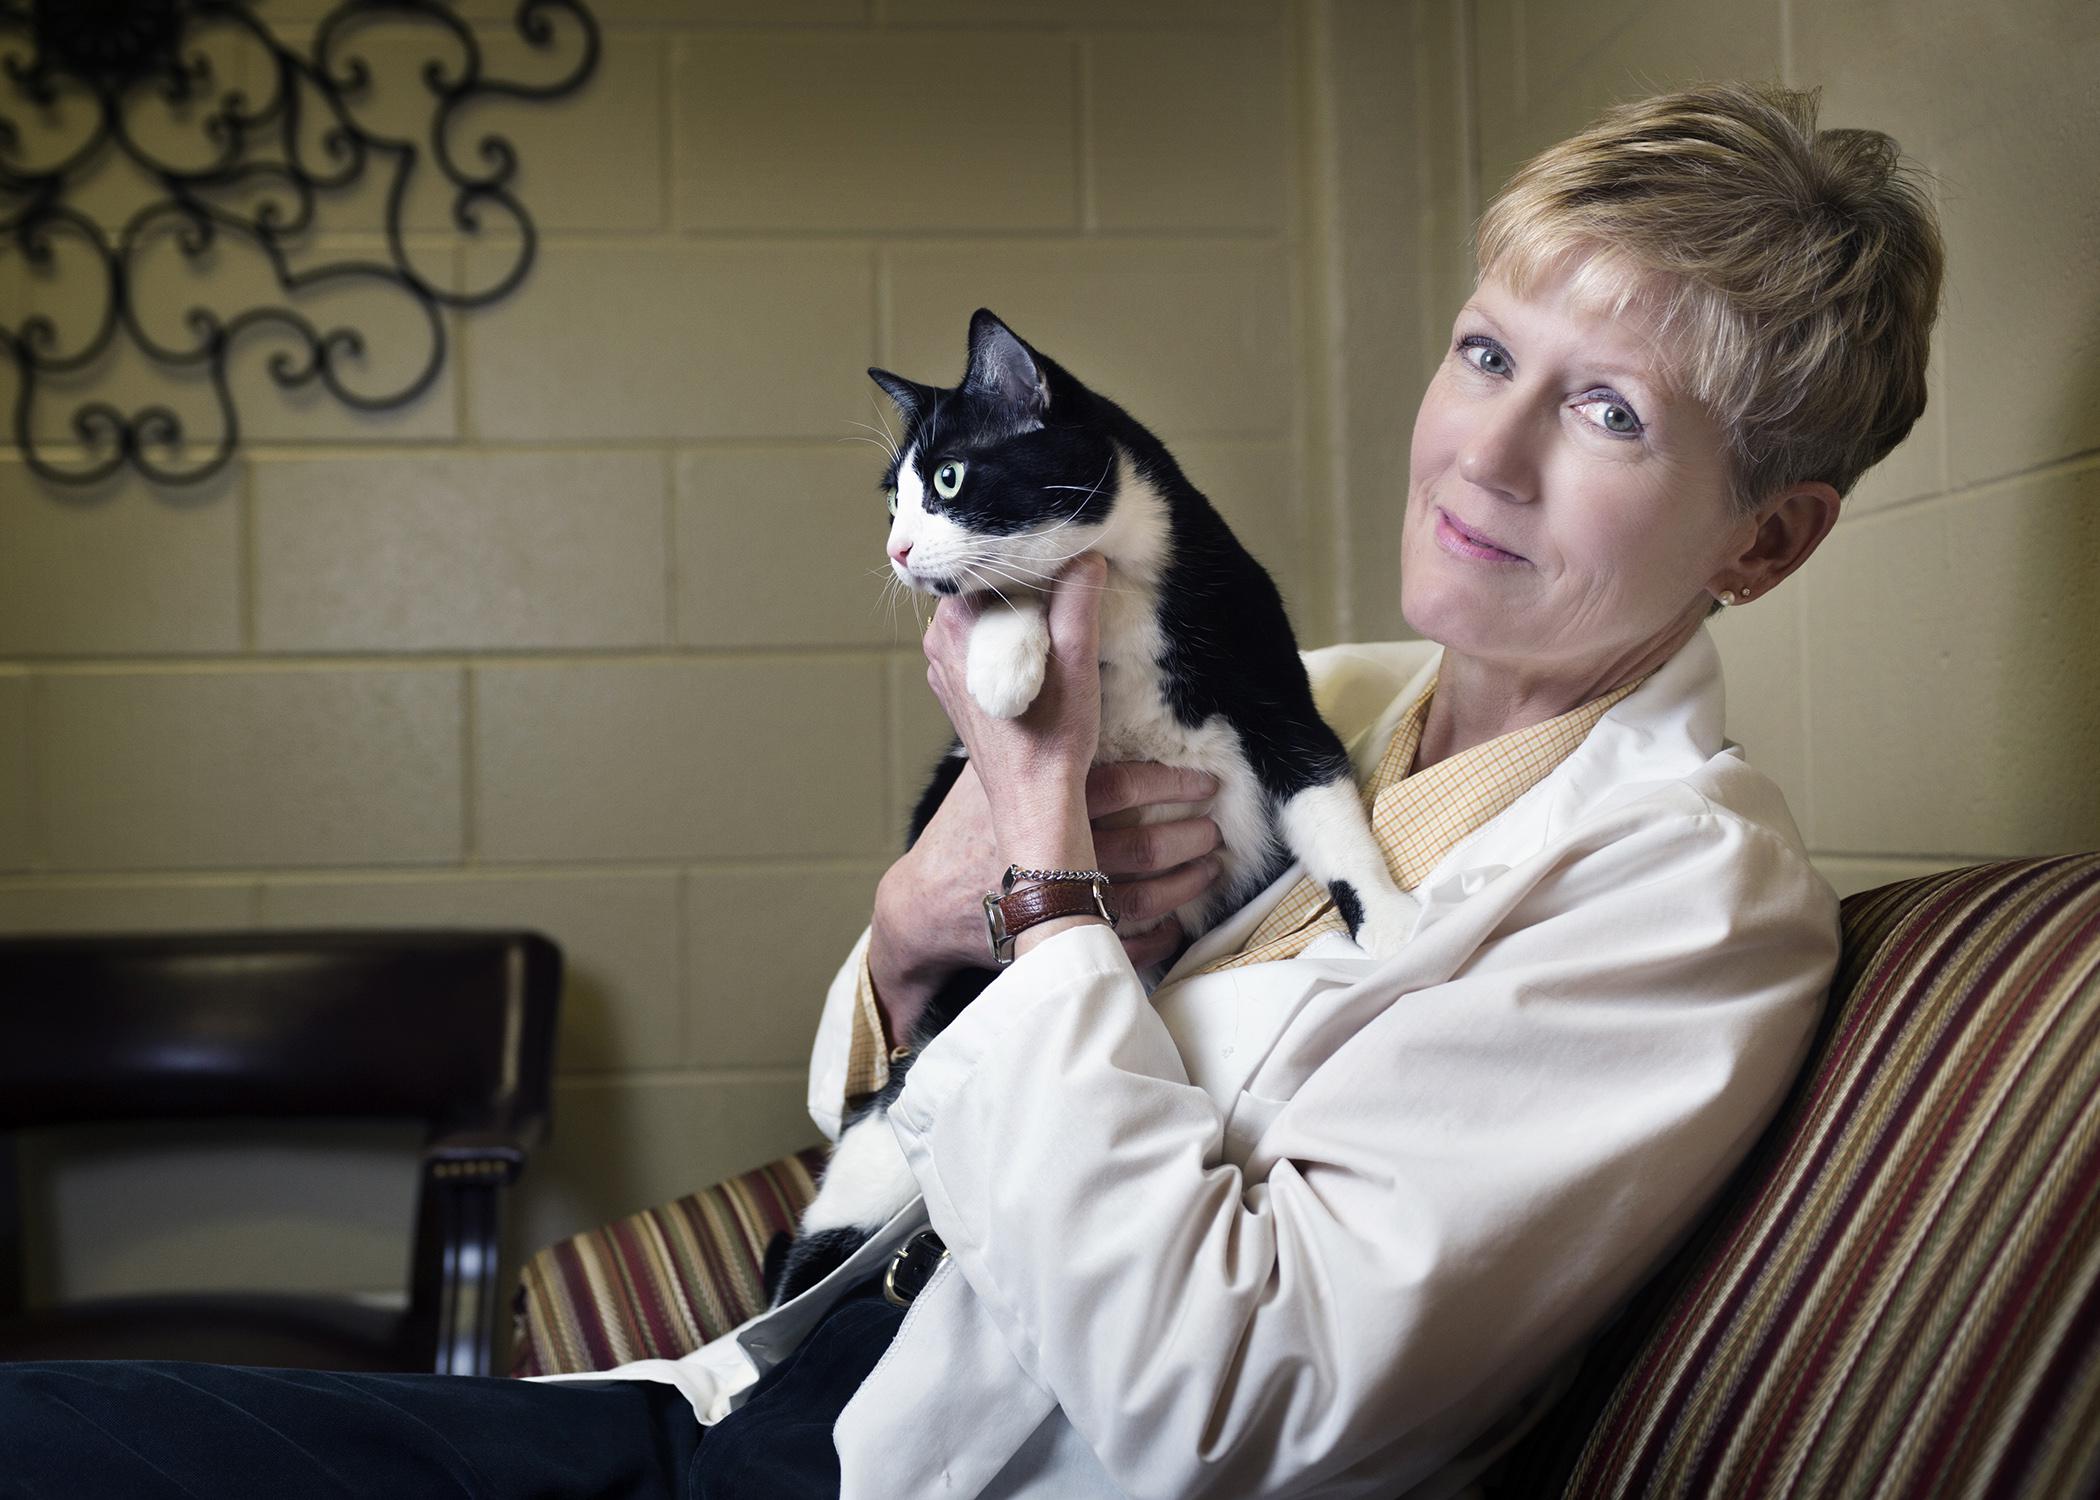 Dr. Sharon Fooshee Grace, a clinical professor in Mississippi State University's College of Veterinary Medicine, has a passion to protect the vulnerable. She works with a domestic violence shelter to provide care for victims' pets, many of which may also need protection and medical care. (Photo by MSU University Relations/Megan Bean)